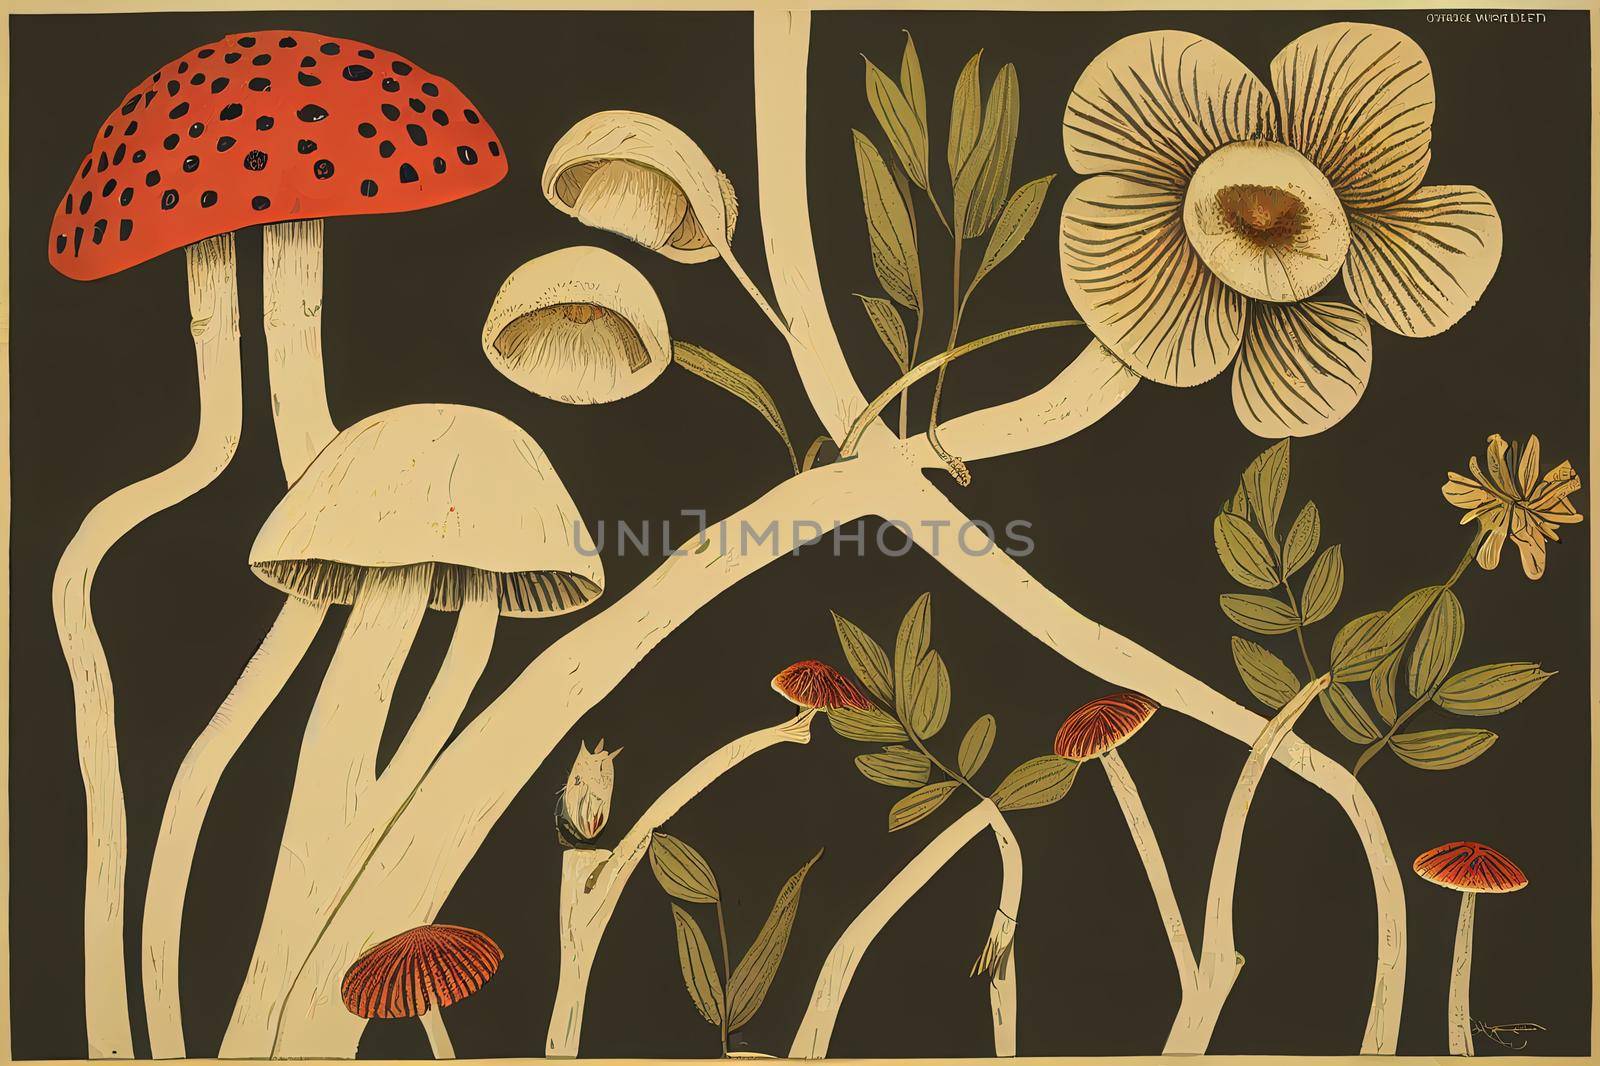 Cute Woodland Animals with Flowers, Plants, Mushrooms and Banner. by 2ragon